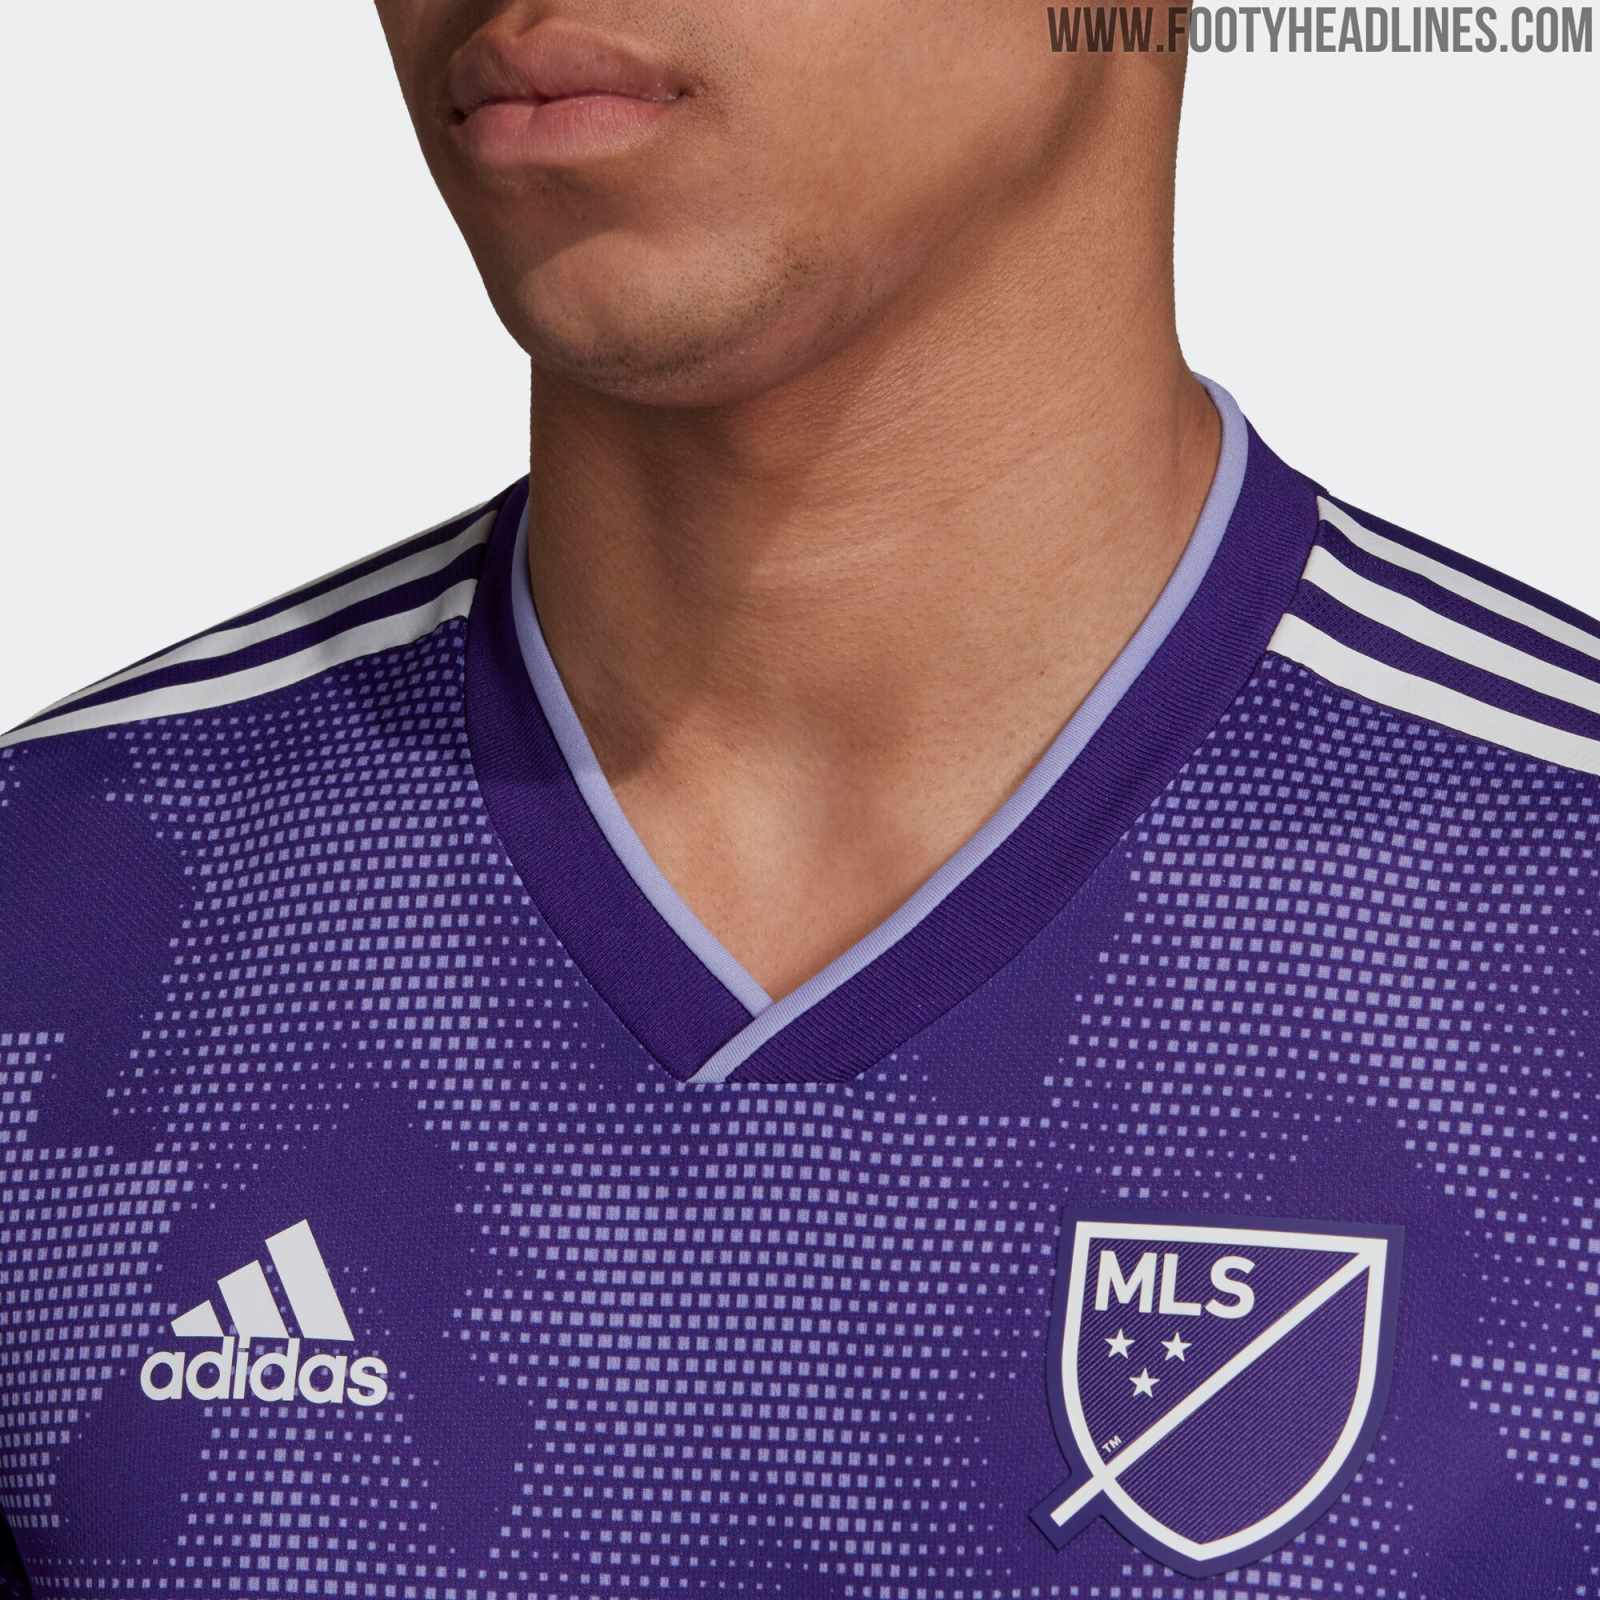 Twitter reacts to the leaked 2019 MLS All-Star jersey